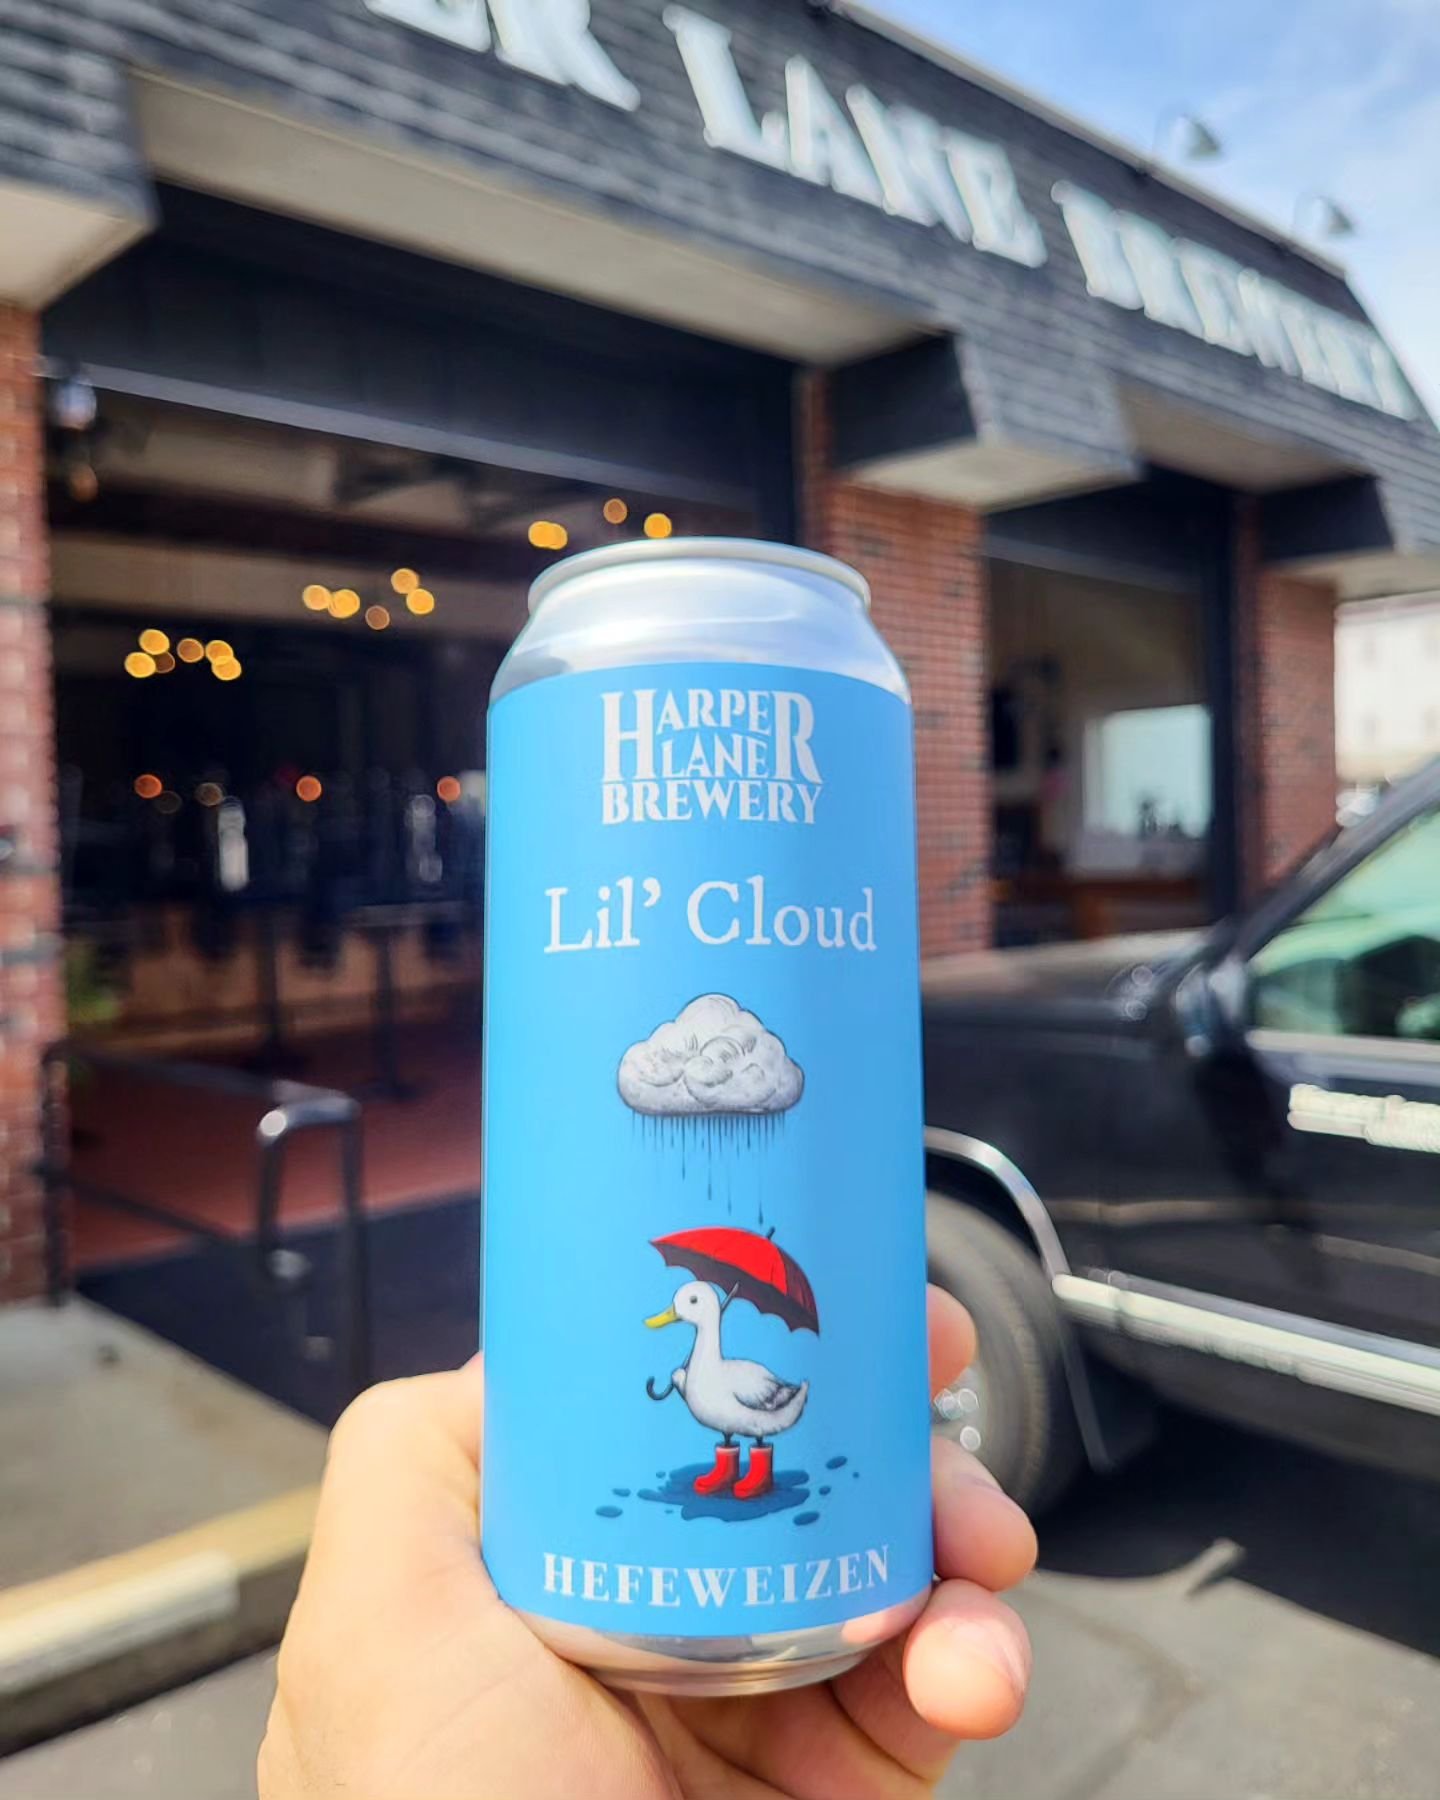 Lil' Cloud now in cans! 

Try this Hefe on draft or now cans to go! What great weather! We're open till 10pm tonight! 

#hefenweizen #middleboro #middleborough #beer #togo #saturday #doorsopen